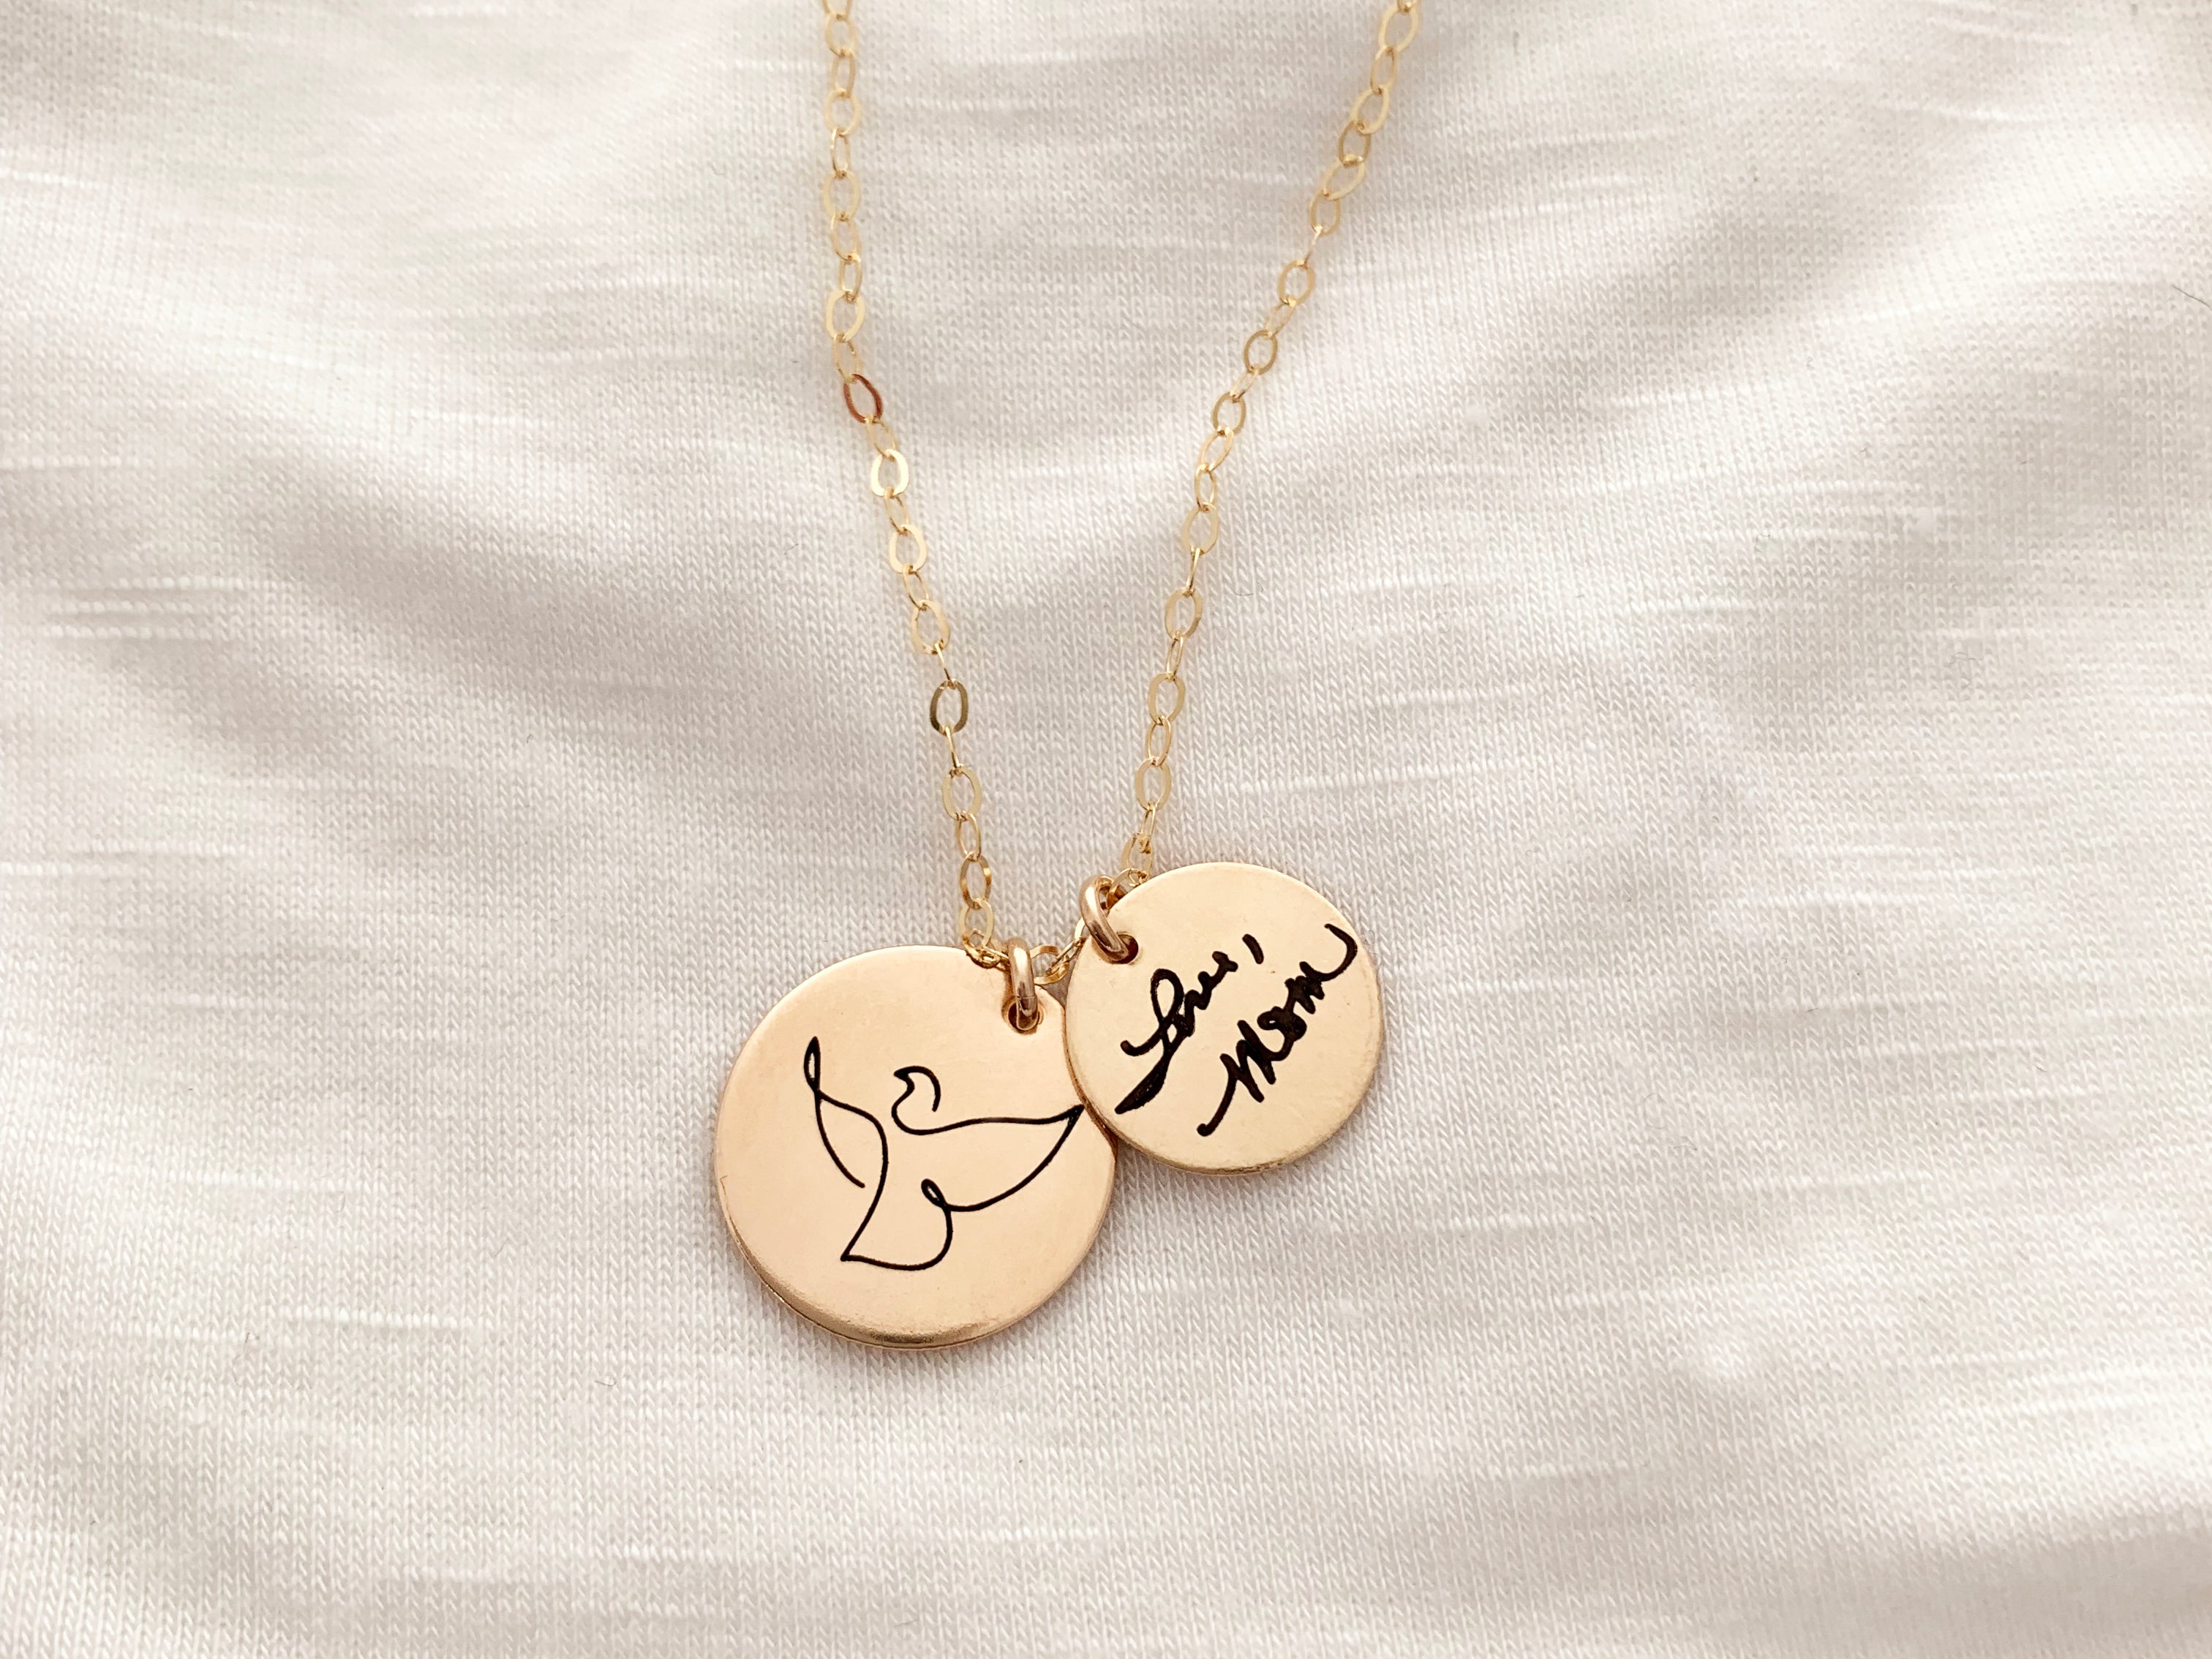 Personalised Handwriting Droplet Necklace in Silver or Gold - Hold upon  Heart